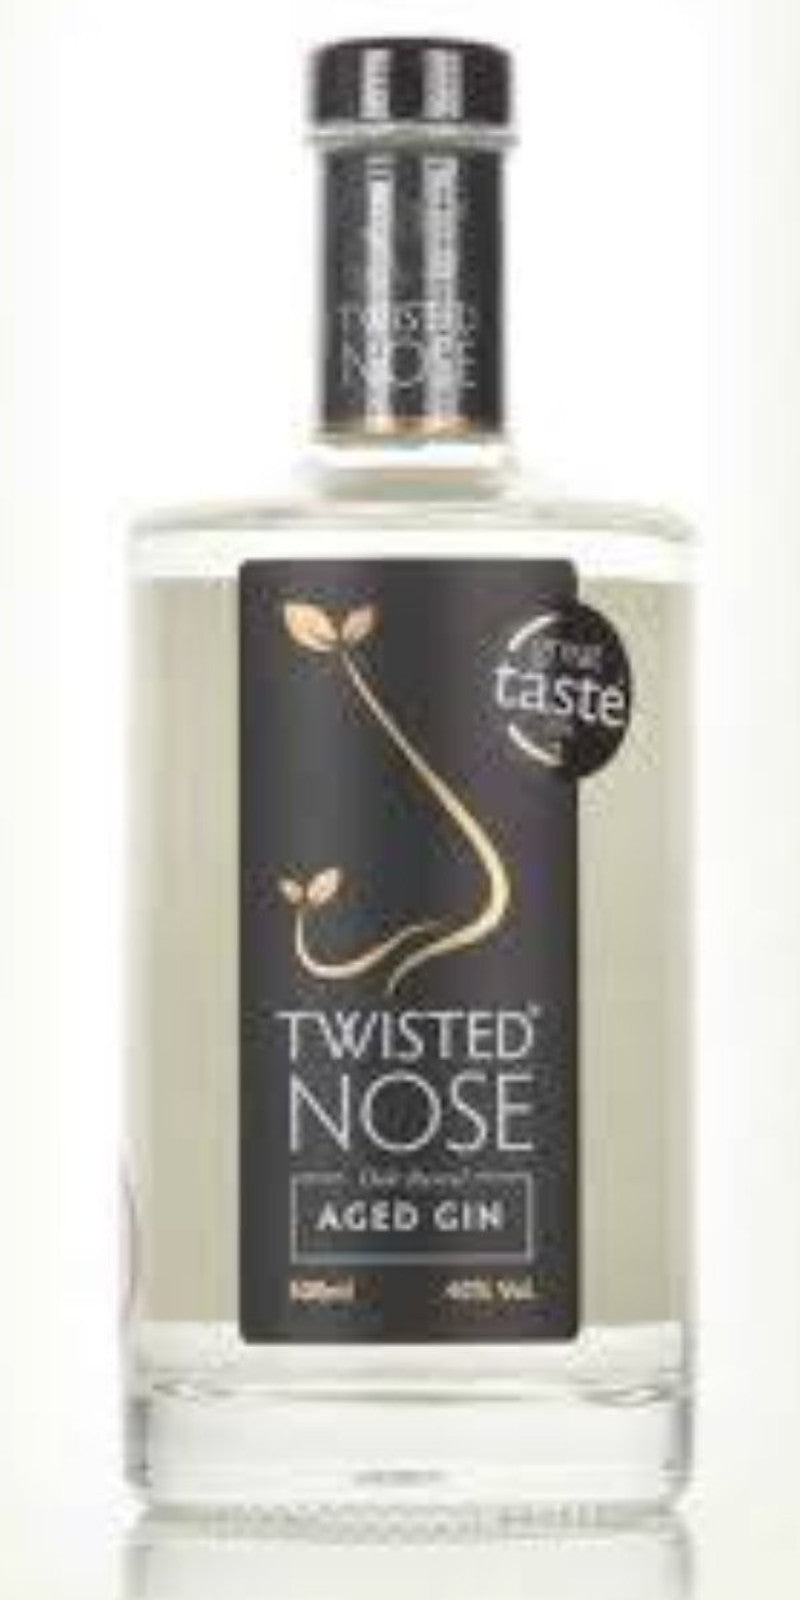 Bottle of Twisted Nose Barrel Aged Dry Gin, 40% - The Spirits Room